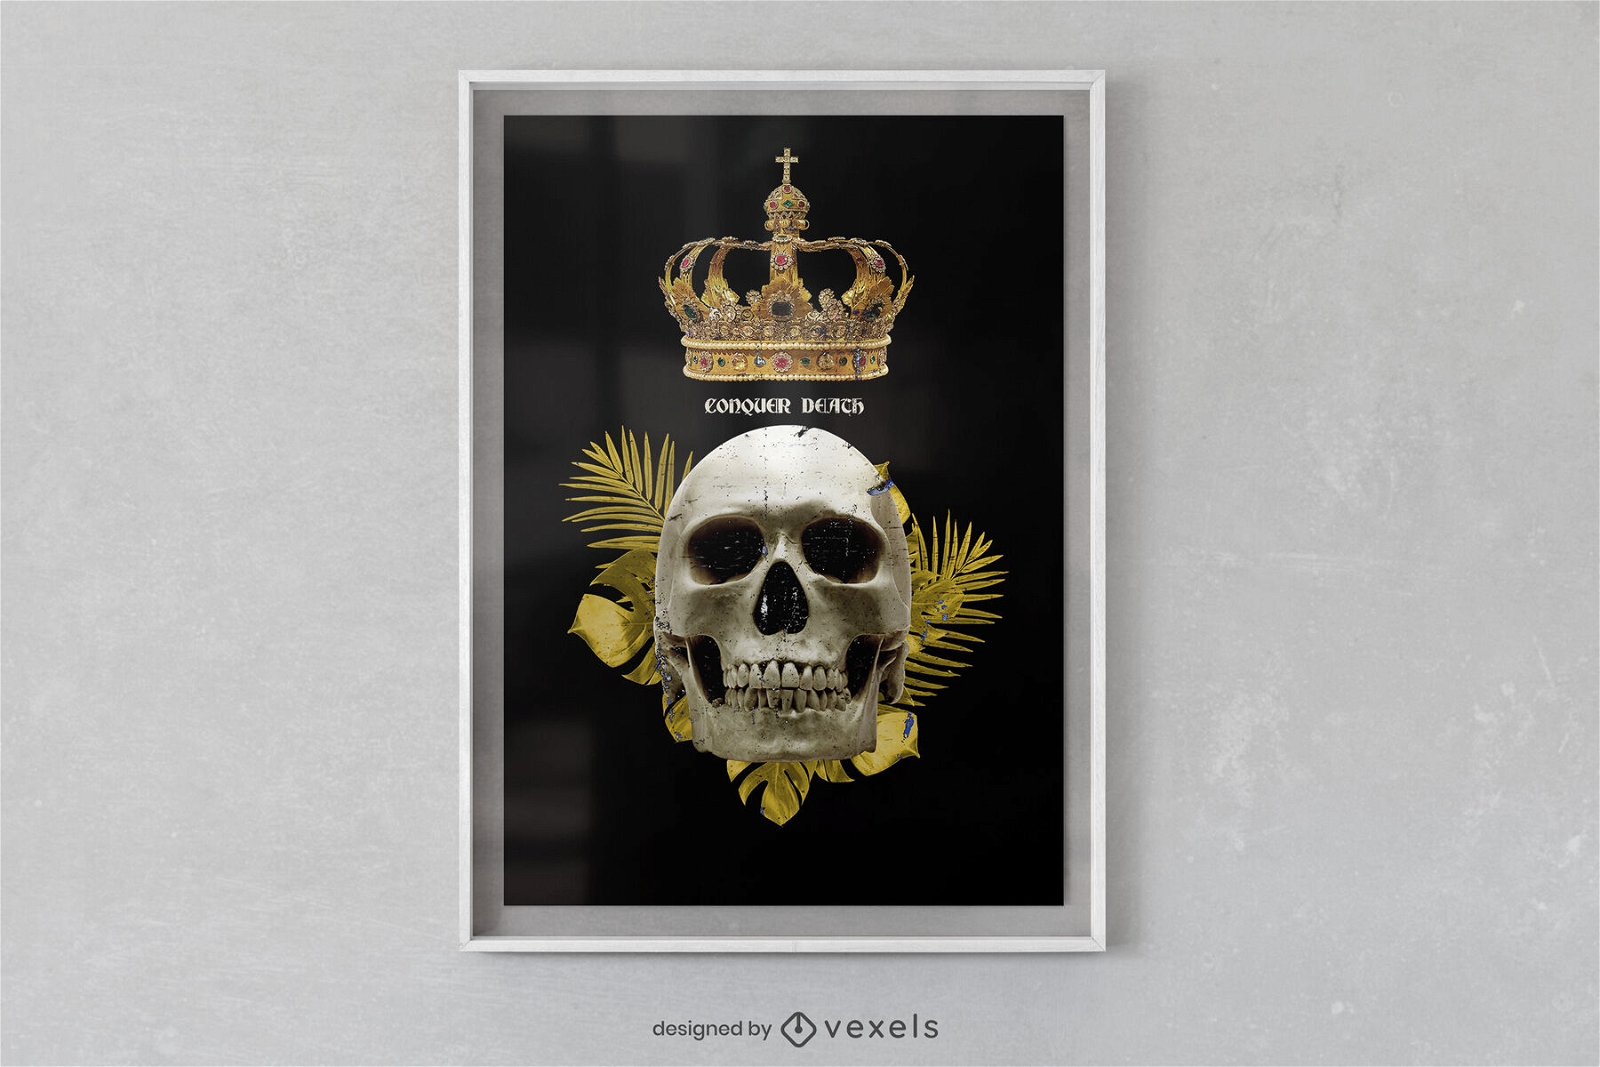 King skull with crown poster design